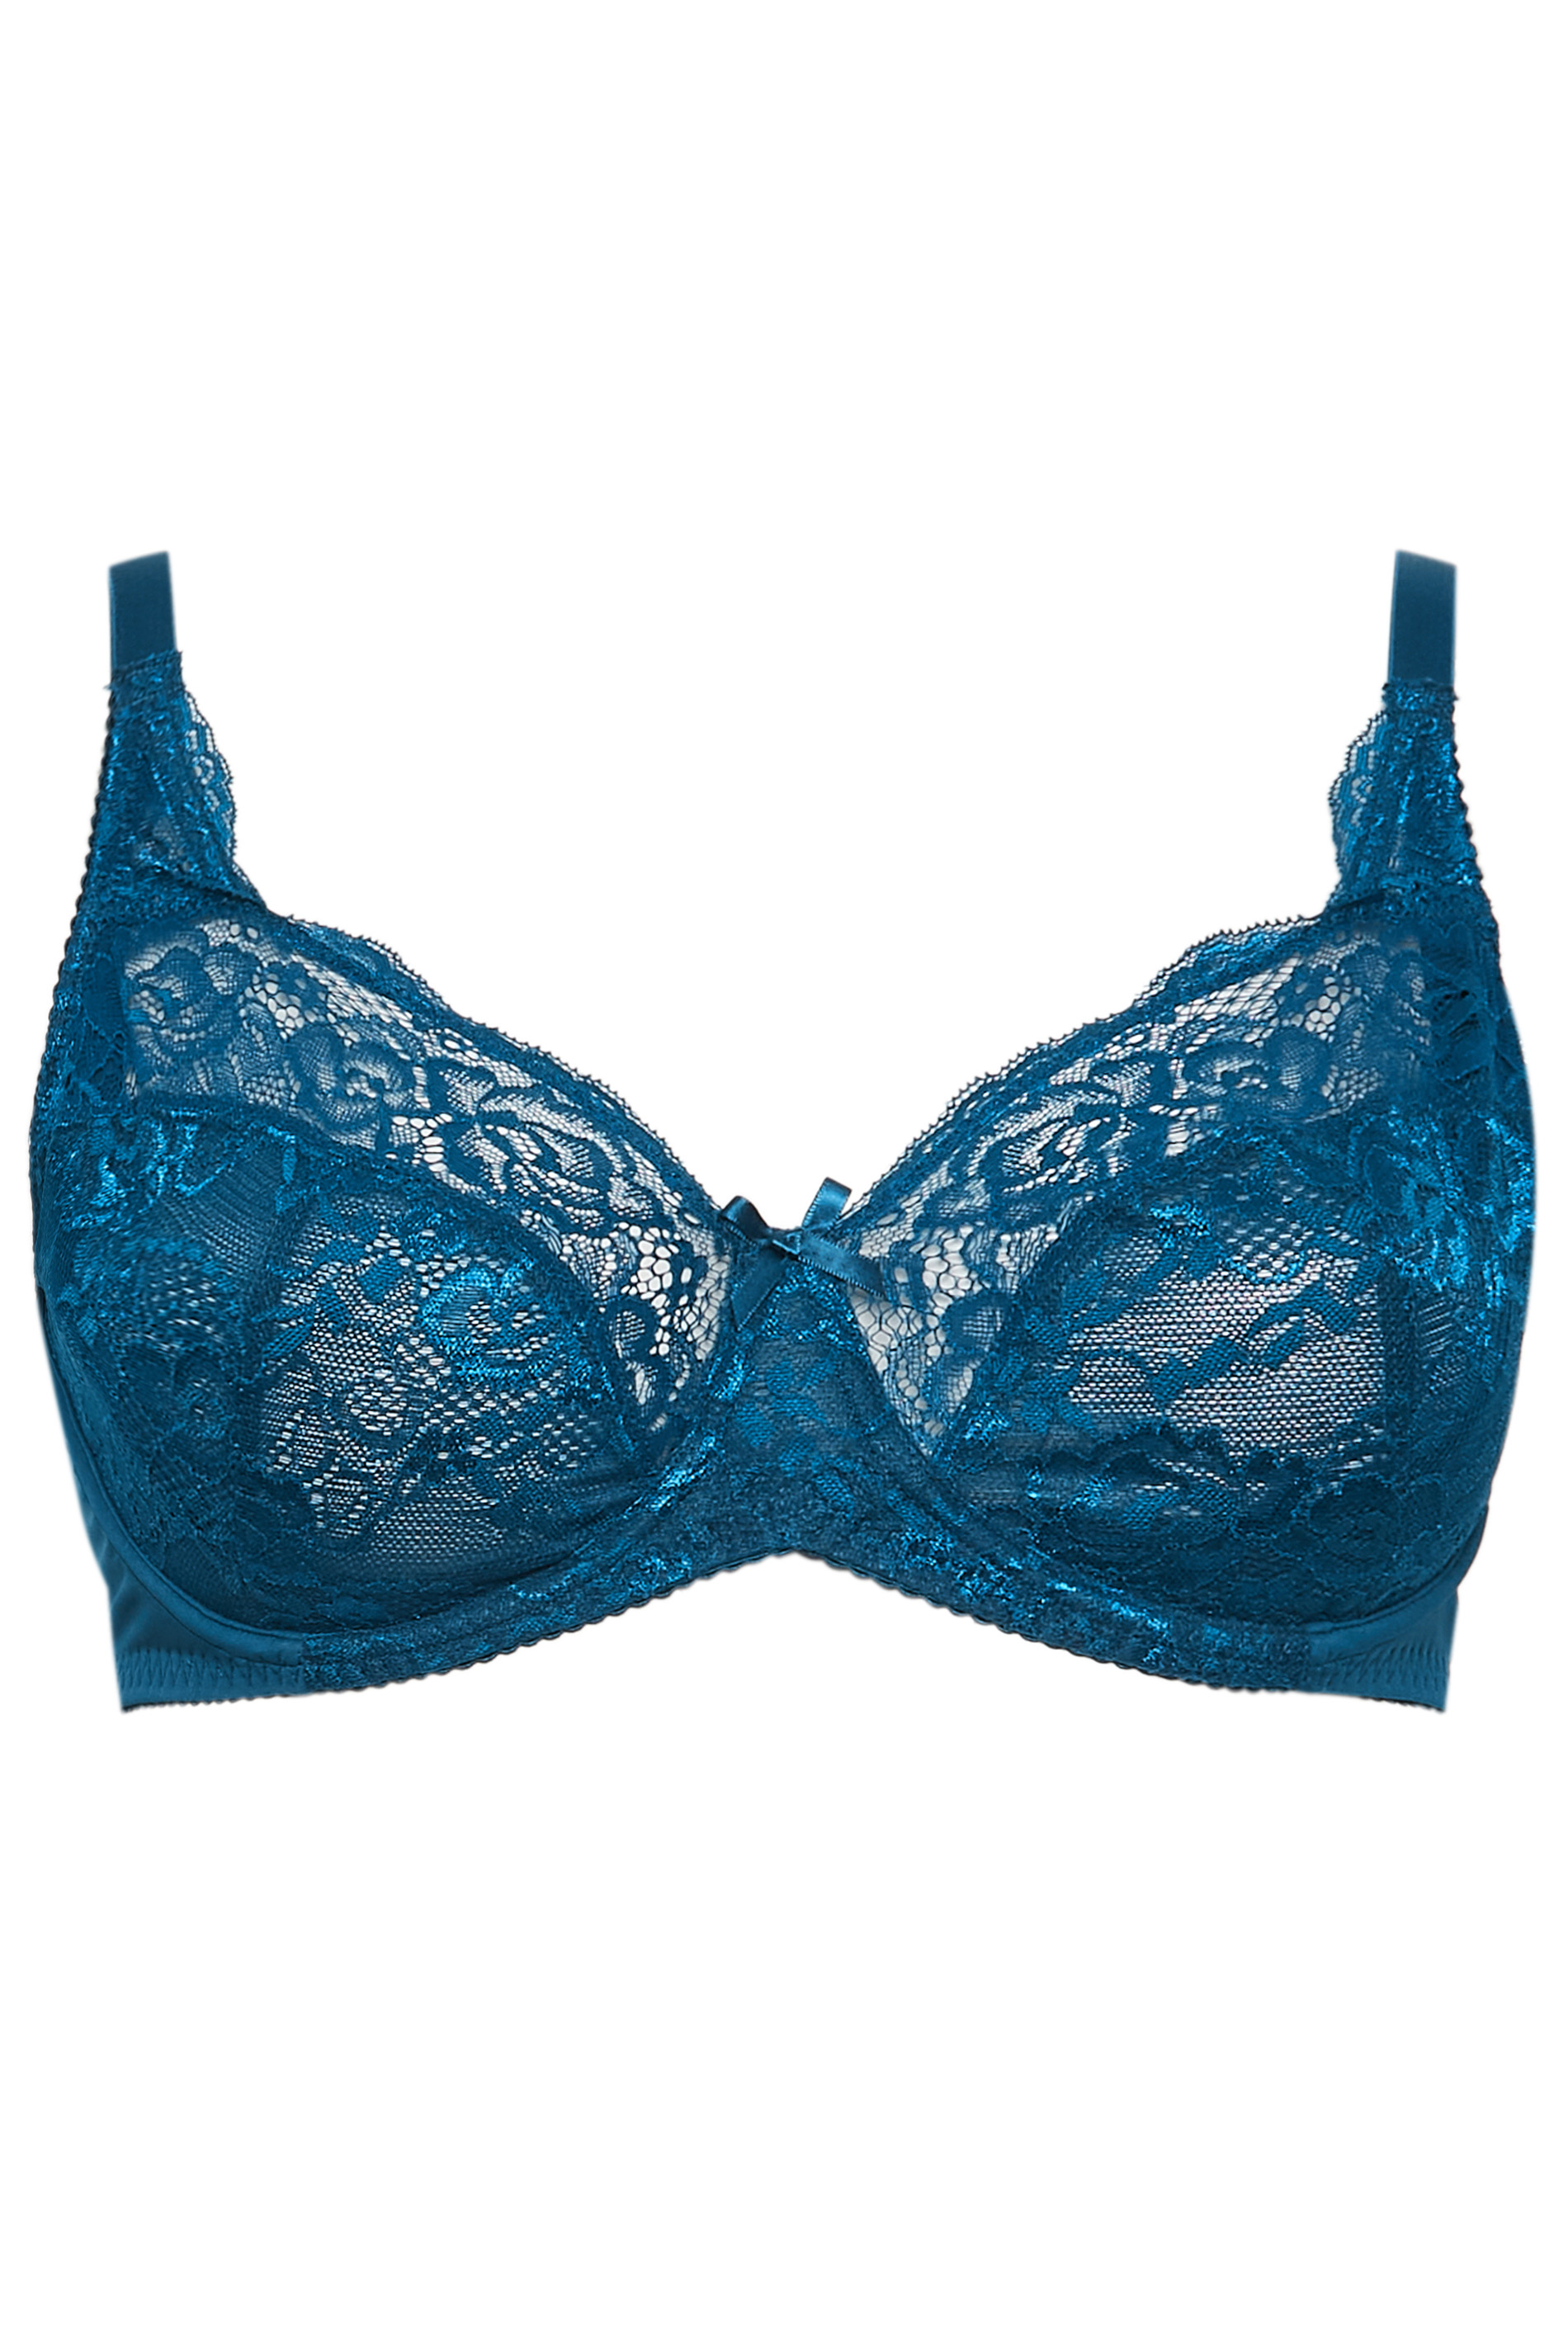 Buy Teal Blue Lace Non Padded Bralette from Next Germany